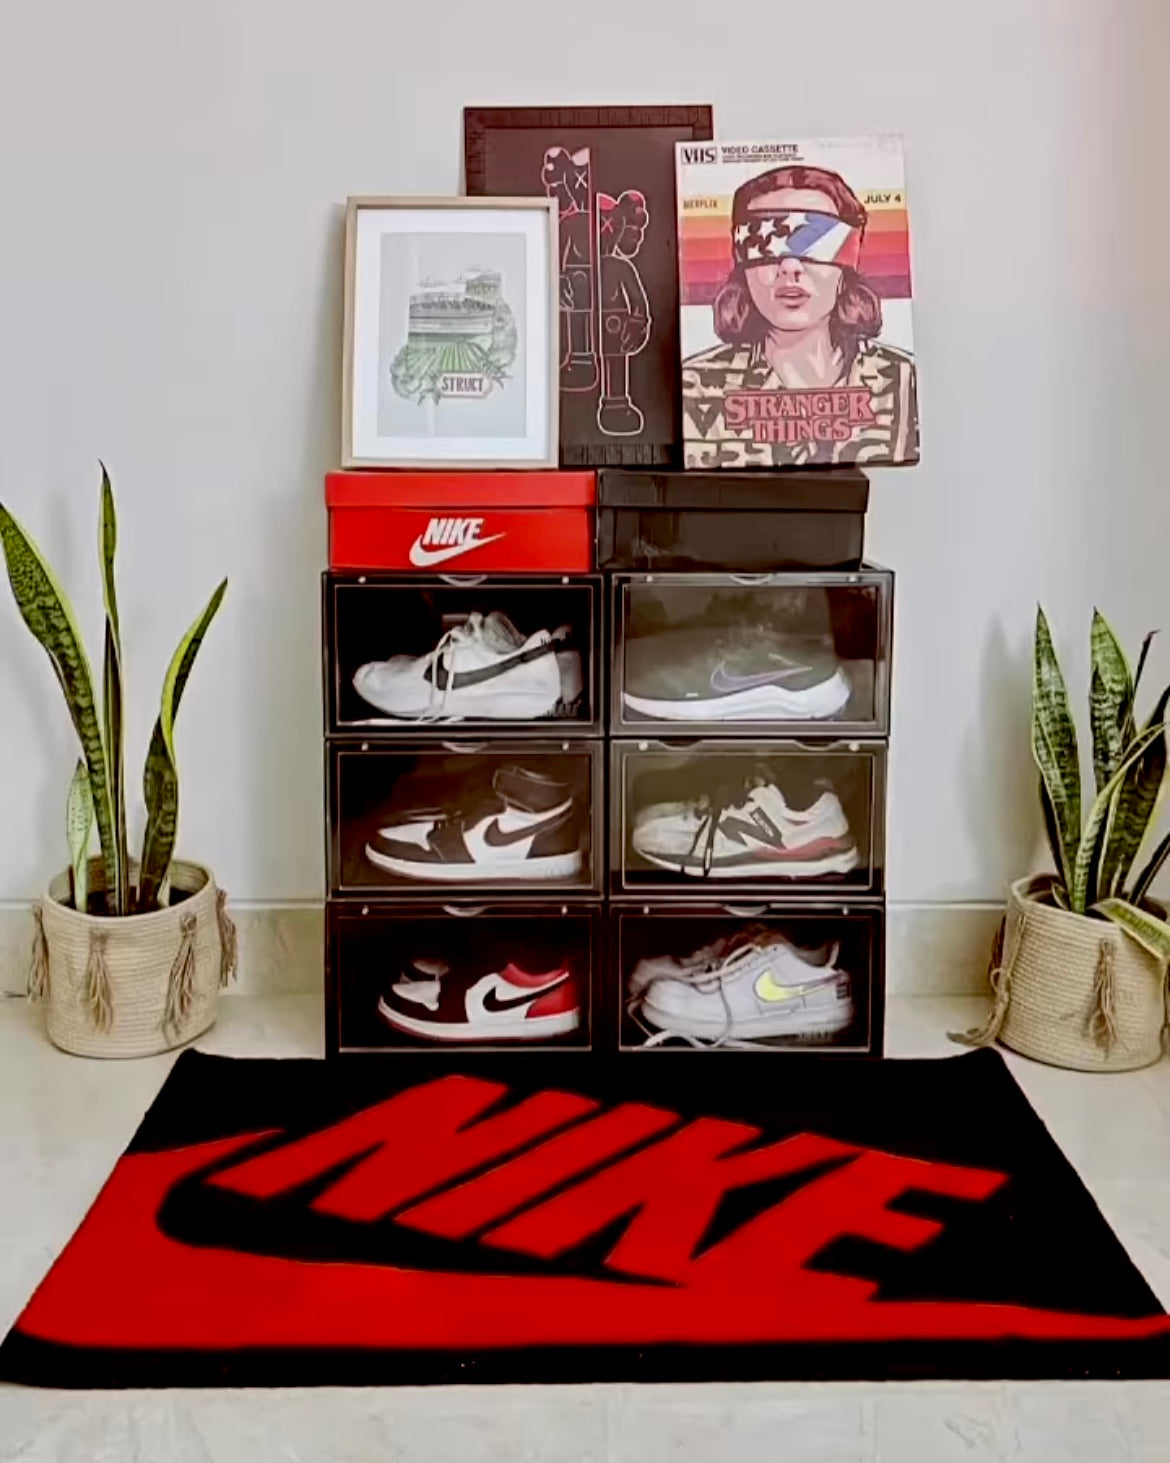 Nike Red and Black Hand-Tufted Rug in front of sneaker crates